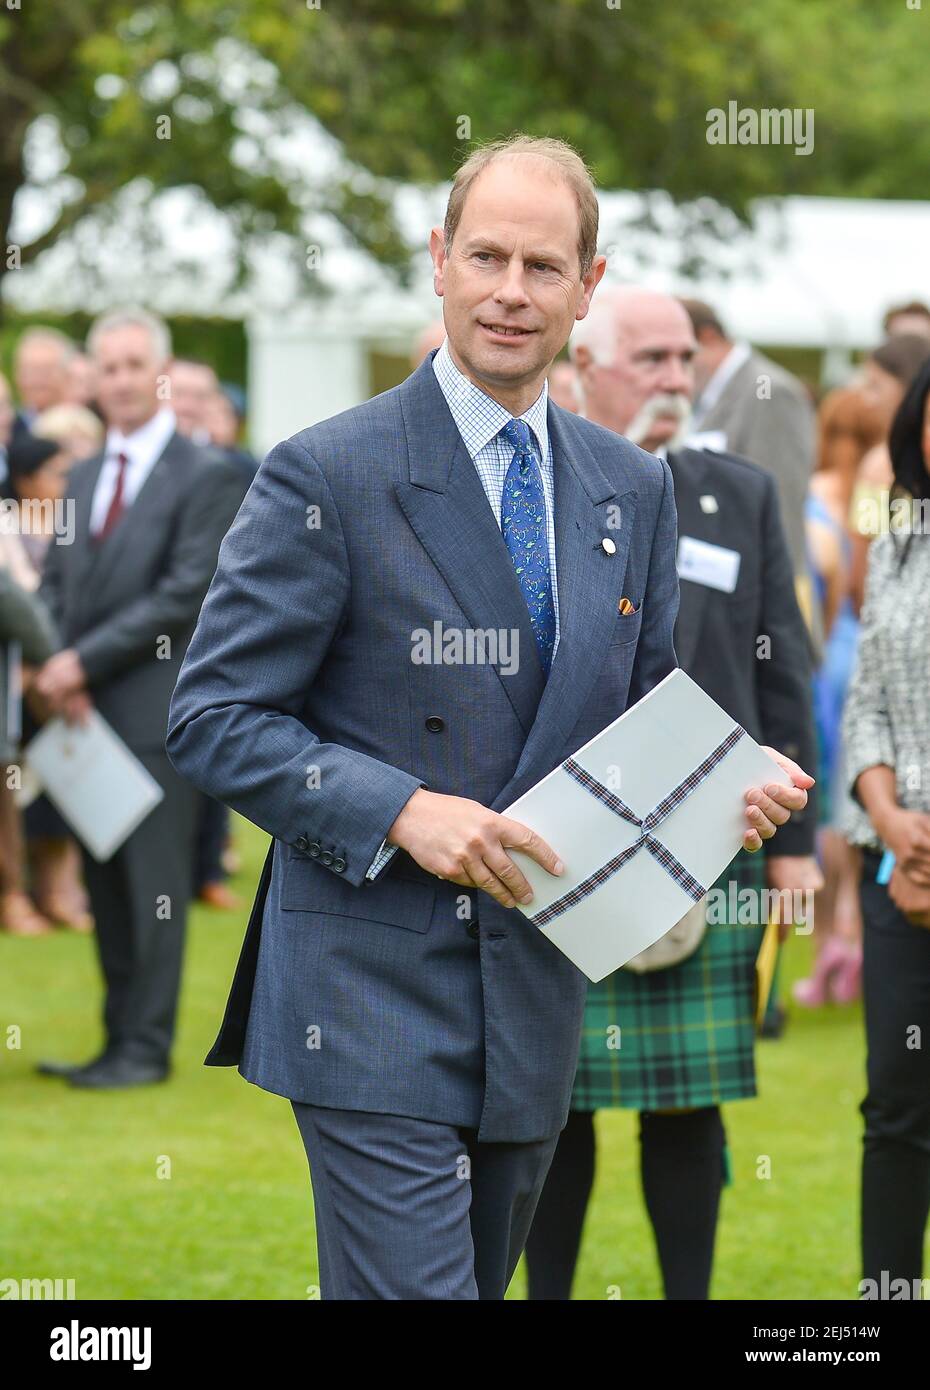 Prince Edward, Earl of Wessex at the Palace of Holyroodhouse, Her Majesty The Queen's official residence in Scotland. Stock Photo